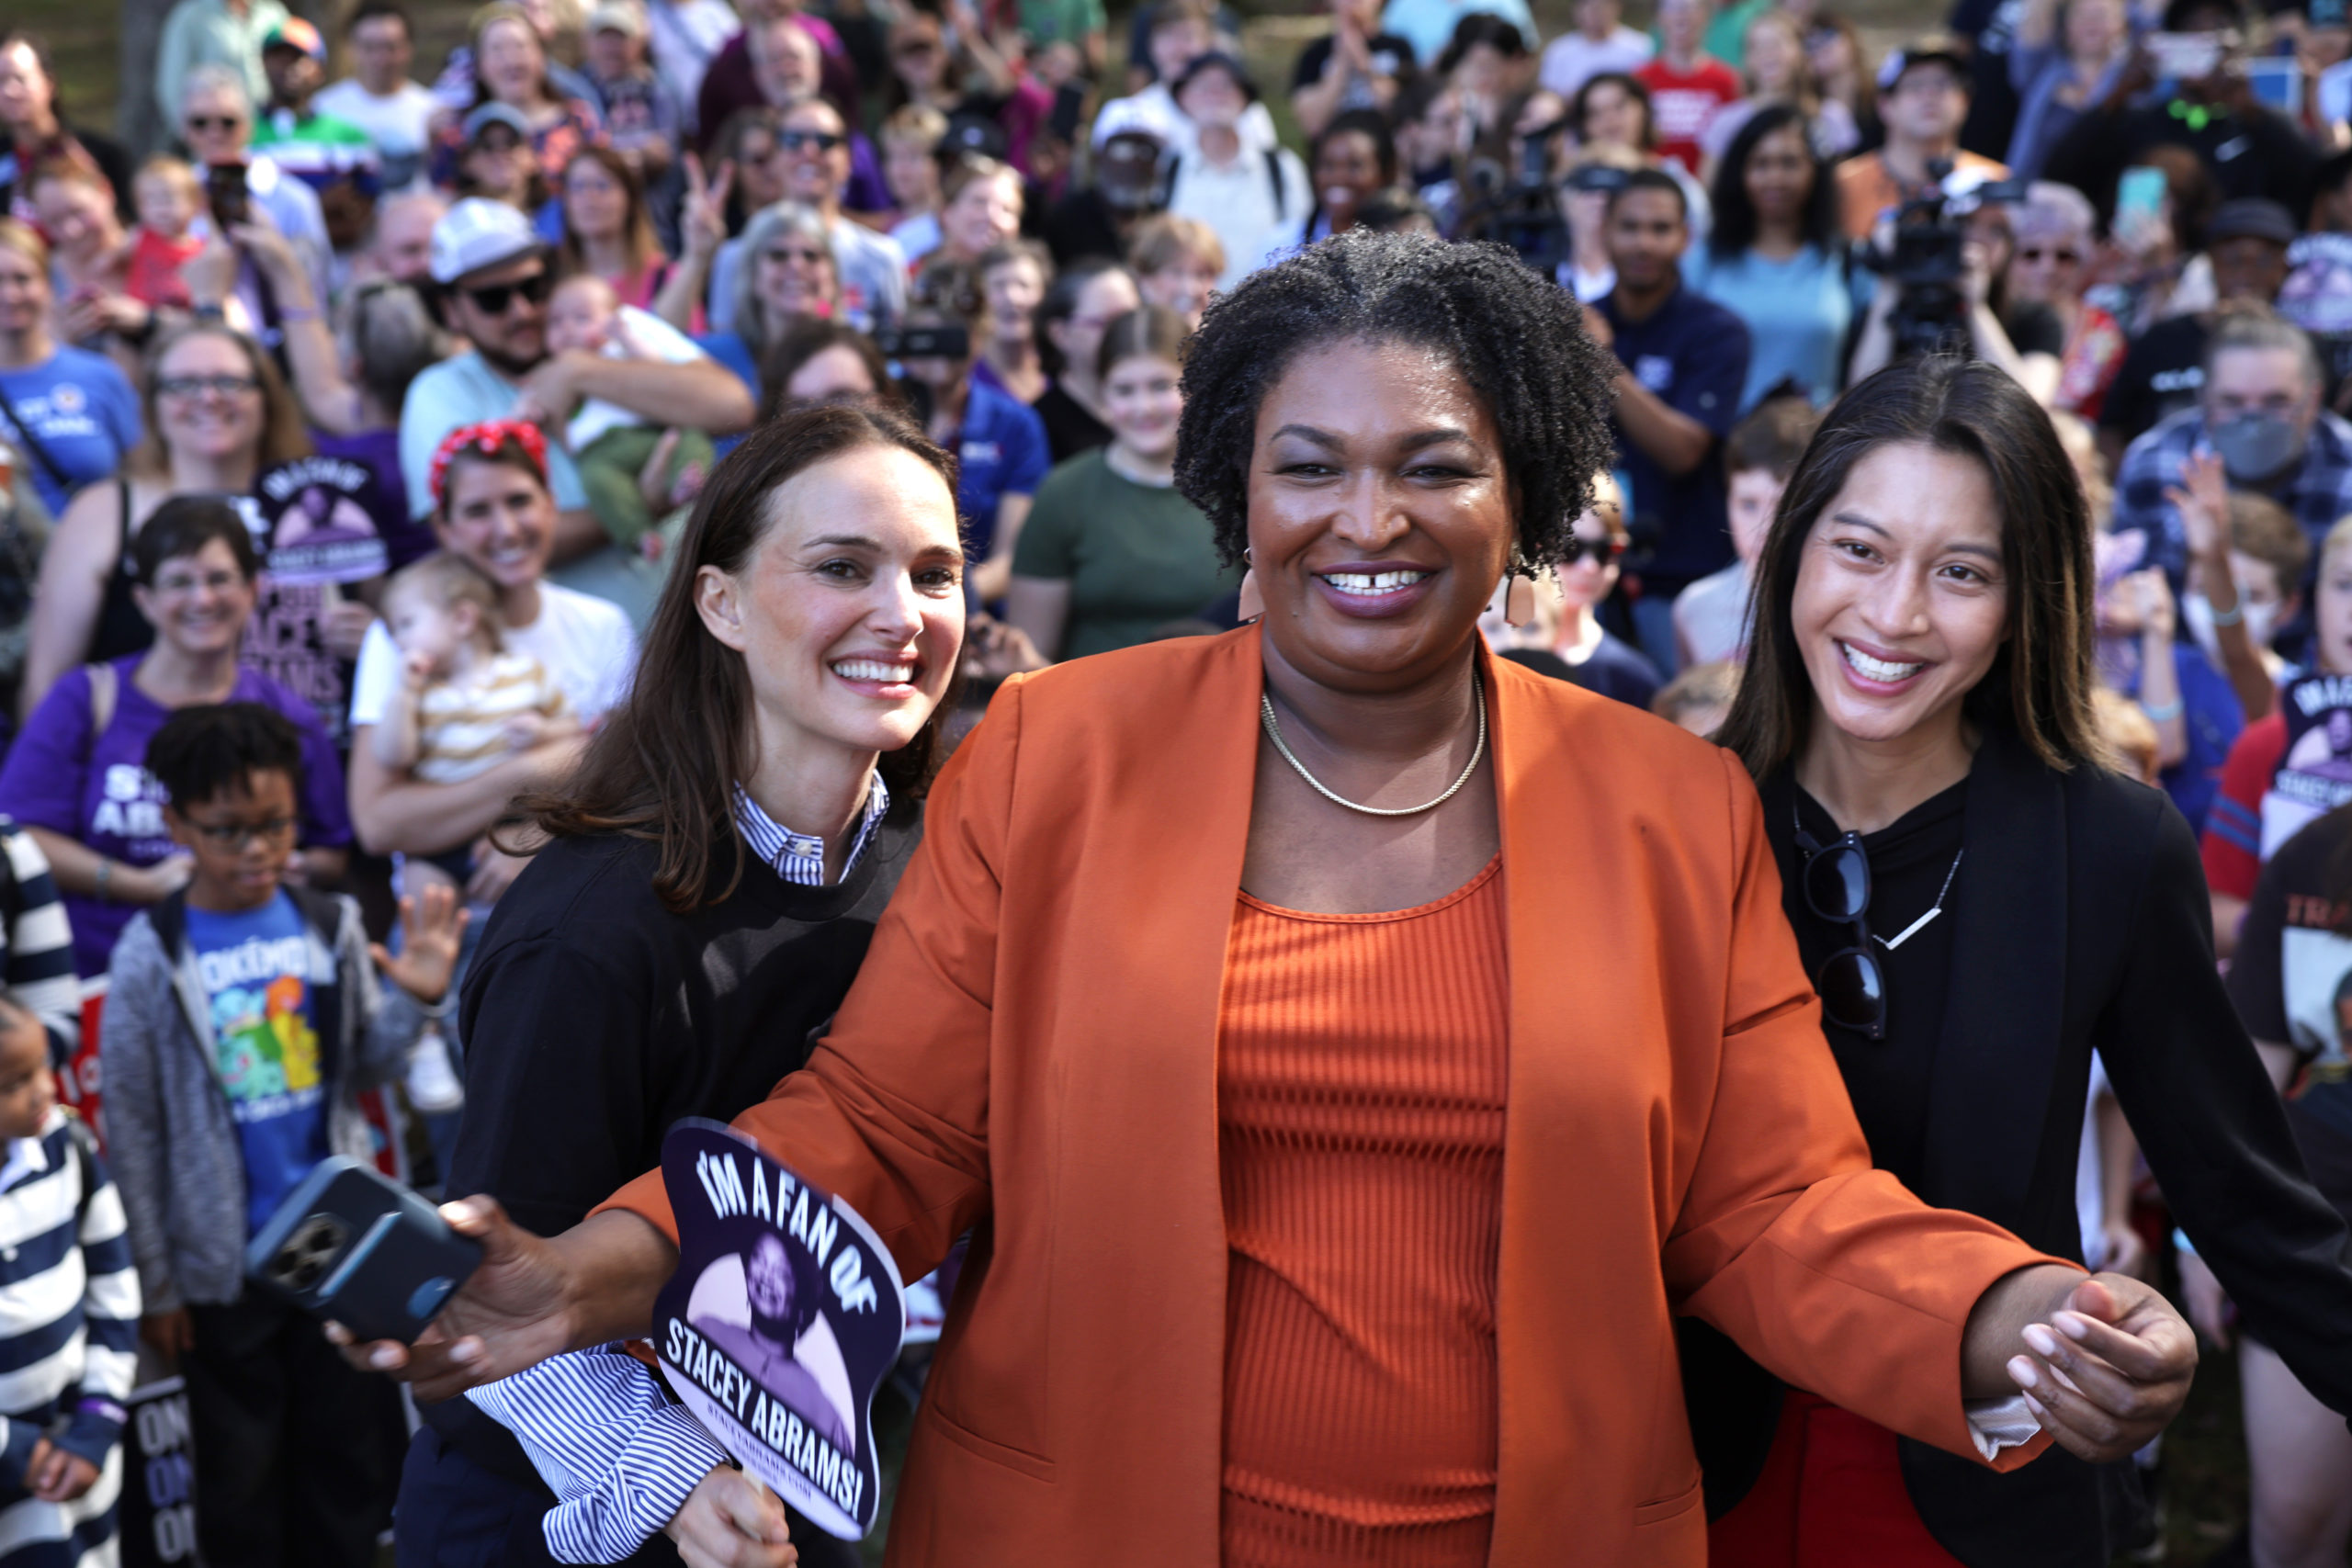 SAVANNAH, GEORGIA - NOVEMBER 05: Democratic Georgia gubernatorial candidate Stacey Abrams (C) poses for photos with supporters, actress Natalie Portman (L) and Democratic candidate for Georgia Secretary of State, and Georgia State House Rep. Bee Nguyen (D-89th District) (R) during a stop of her statewide campaign bus tour on November 5, 2022 in Savannah, Georgia. (Photo by Alex Wong/Getty Images)